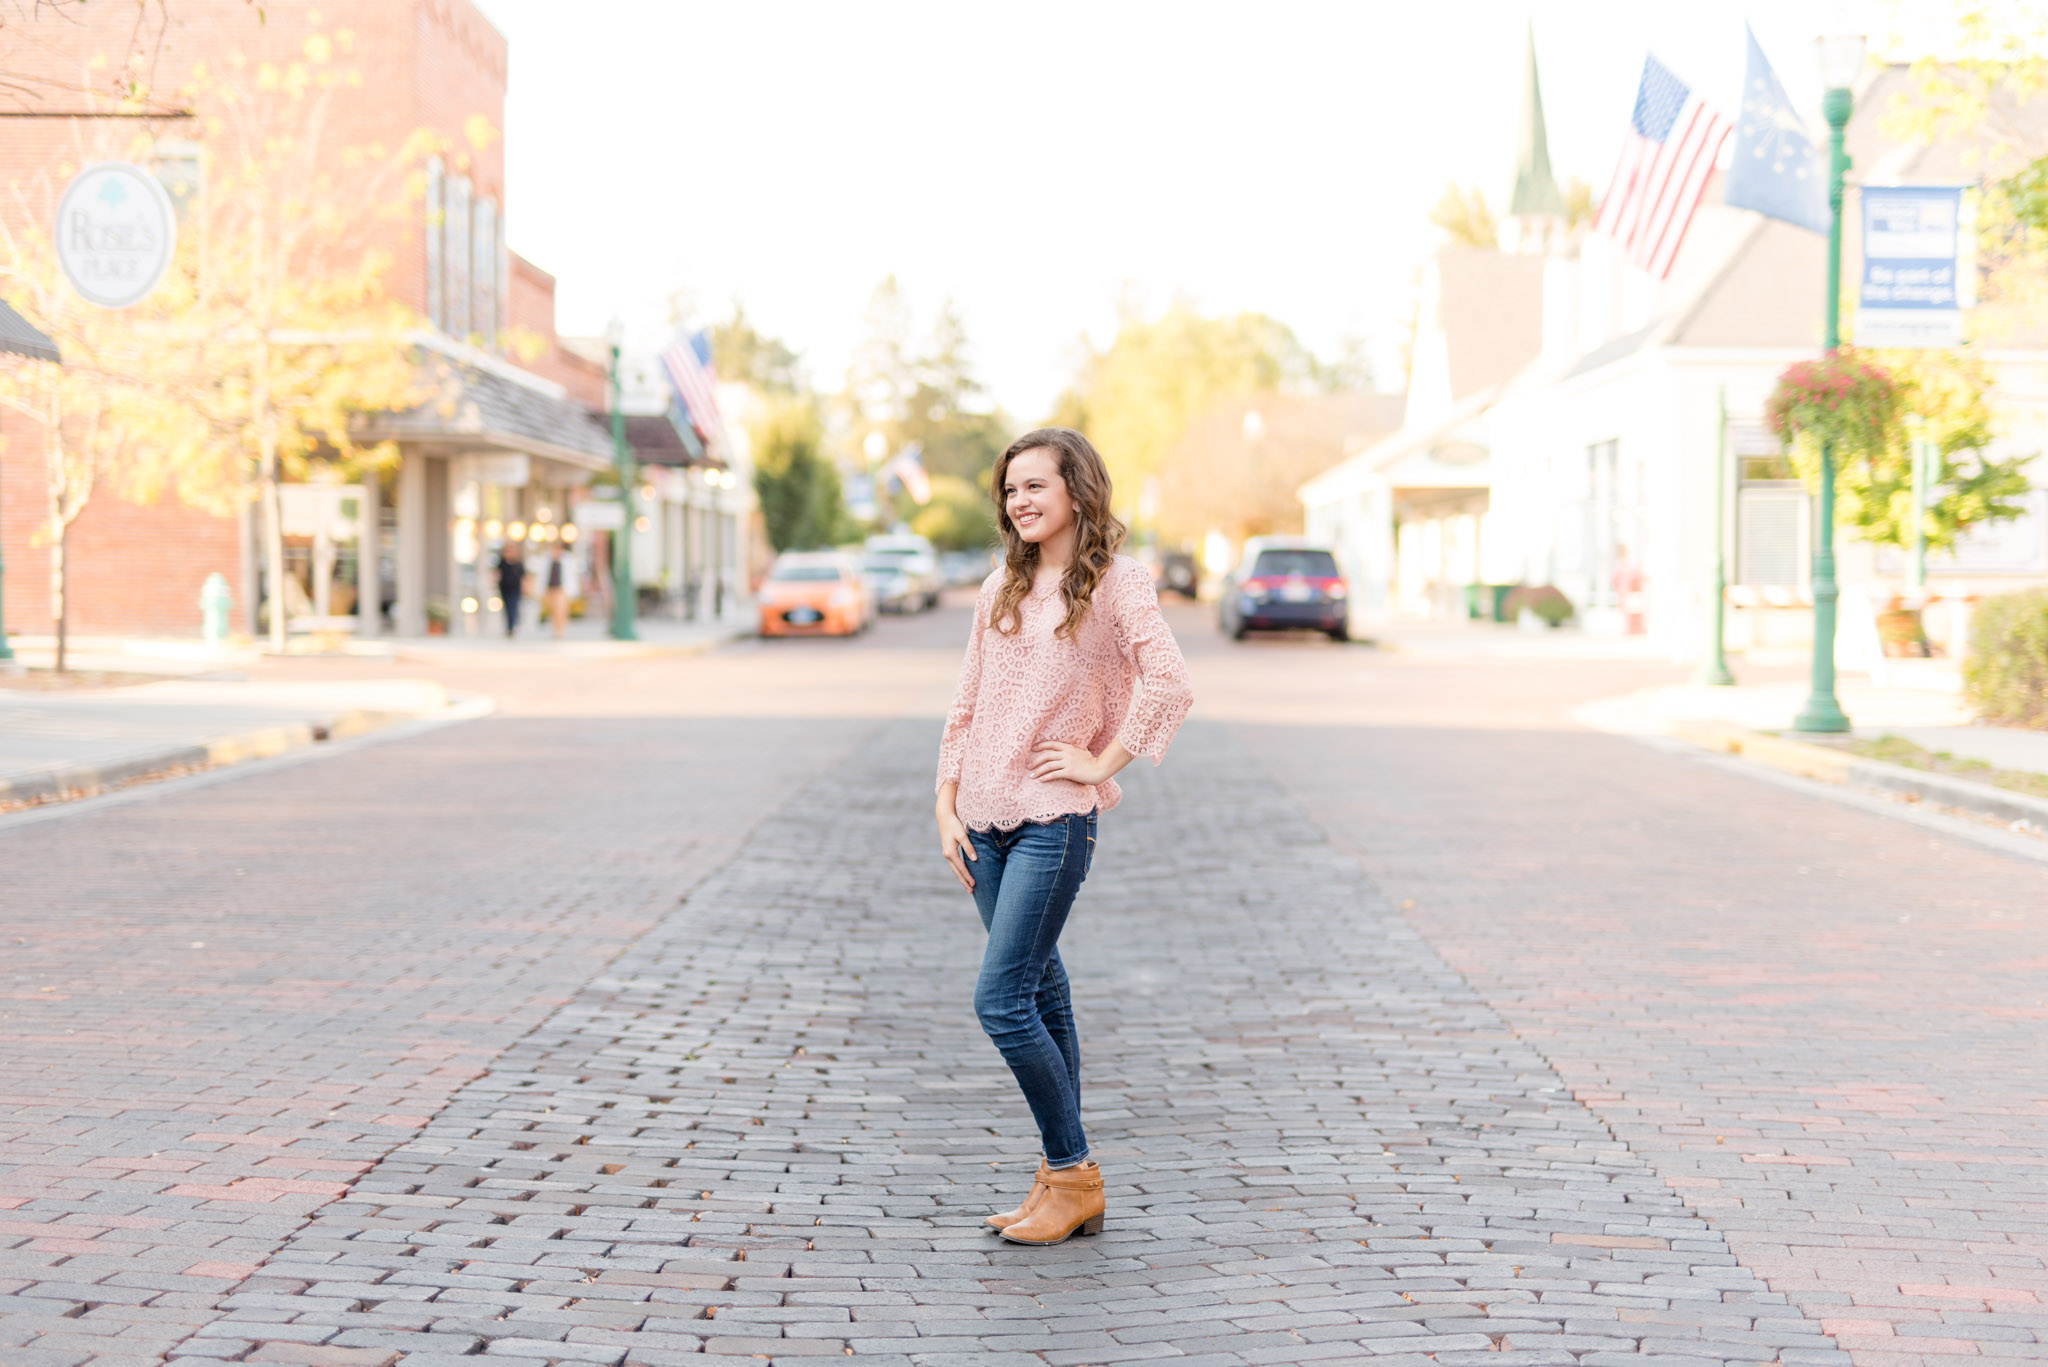 High school senior stands on brick road and smiles off camera.